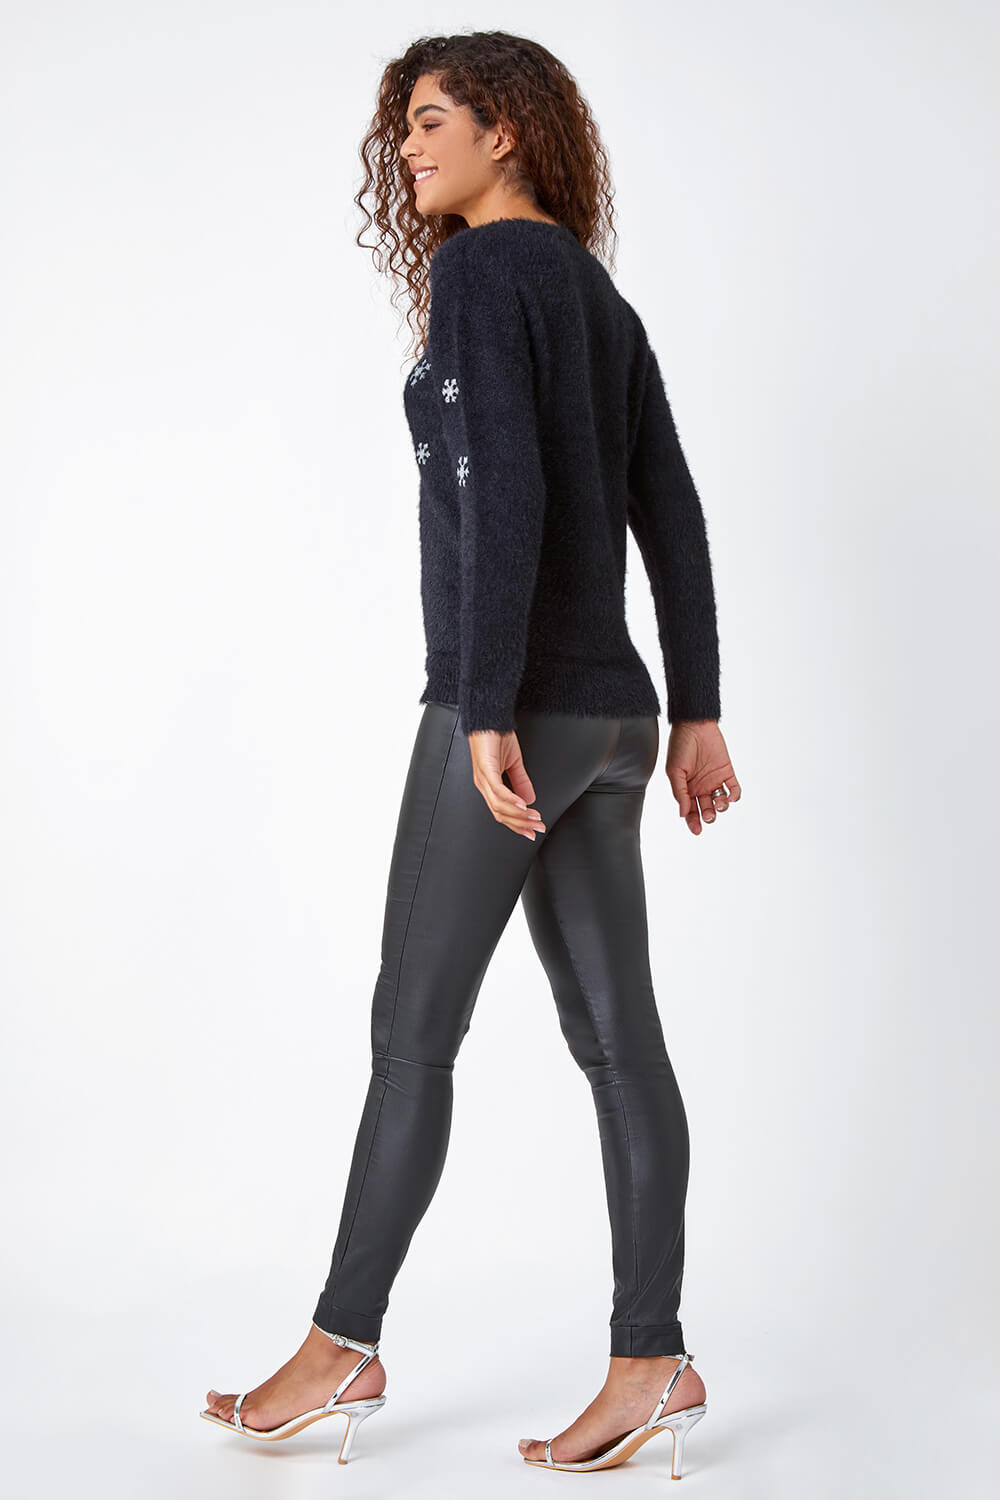 Black Snowflake Sequin Fluffy Stretch Jumper, Image 3 of 5